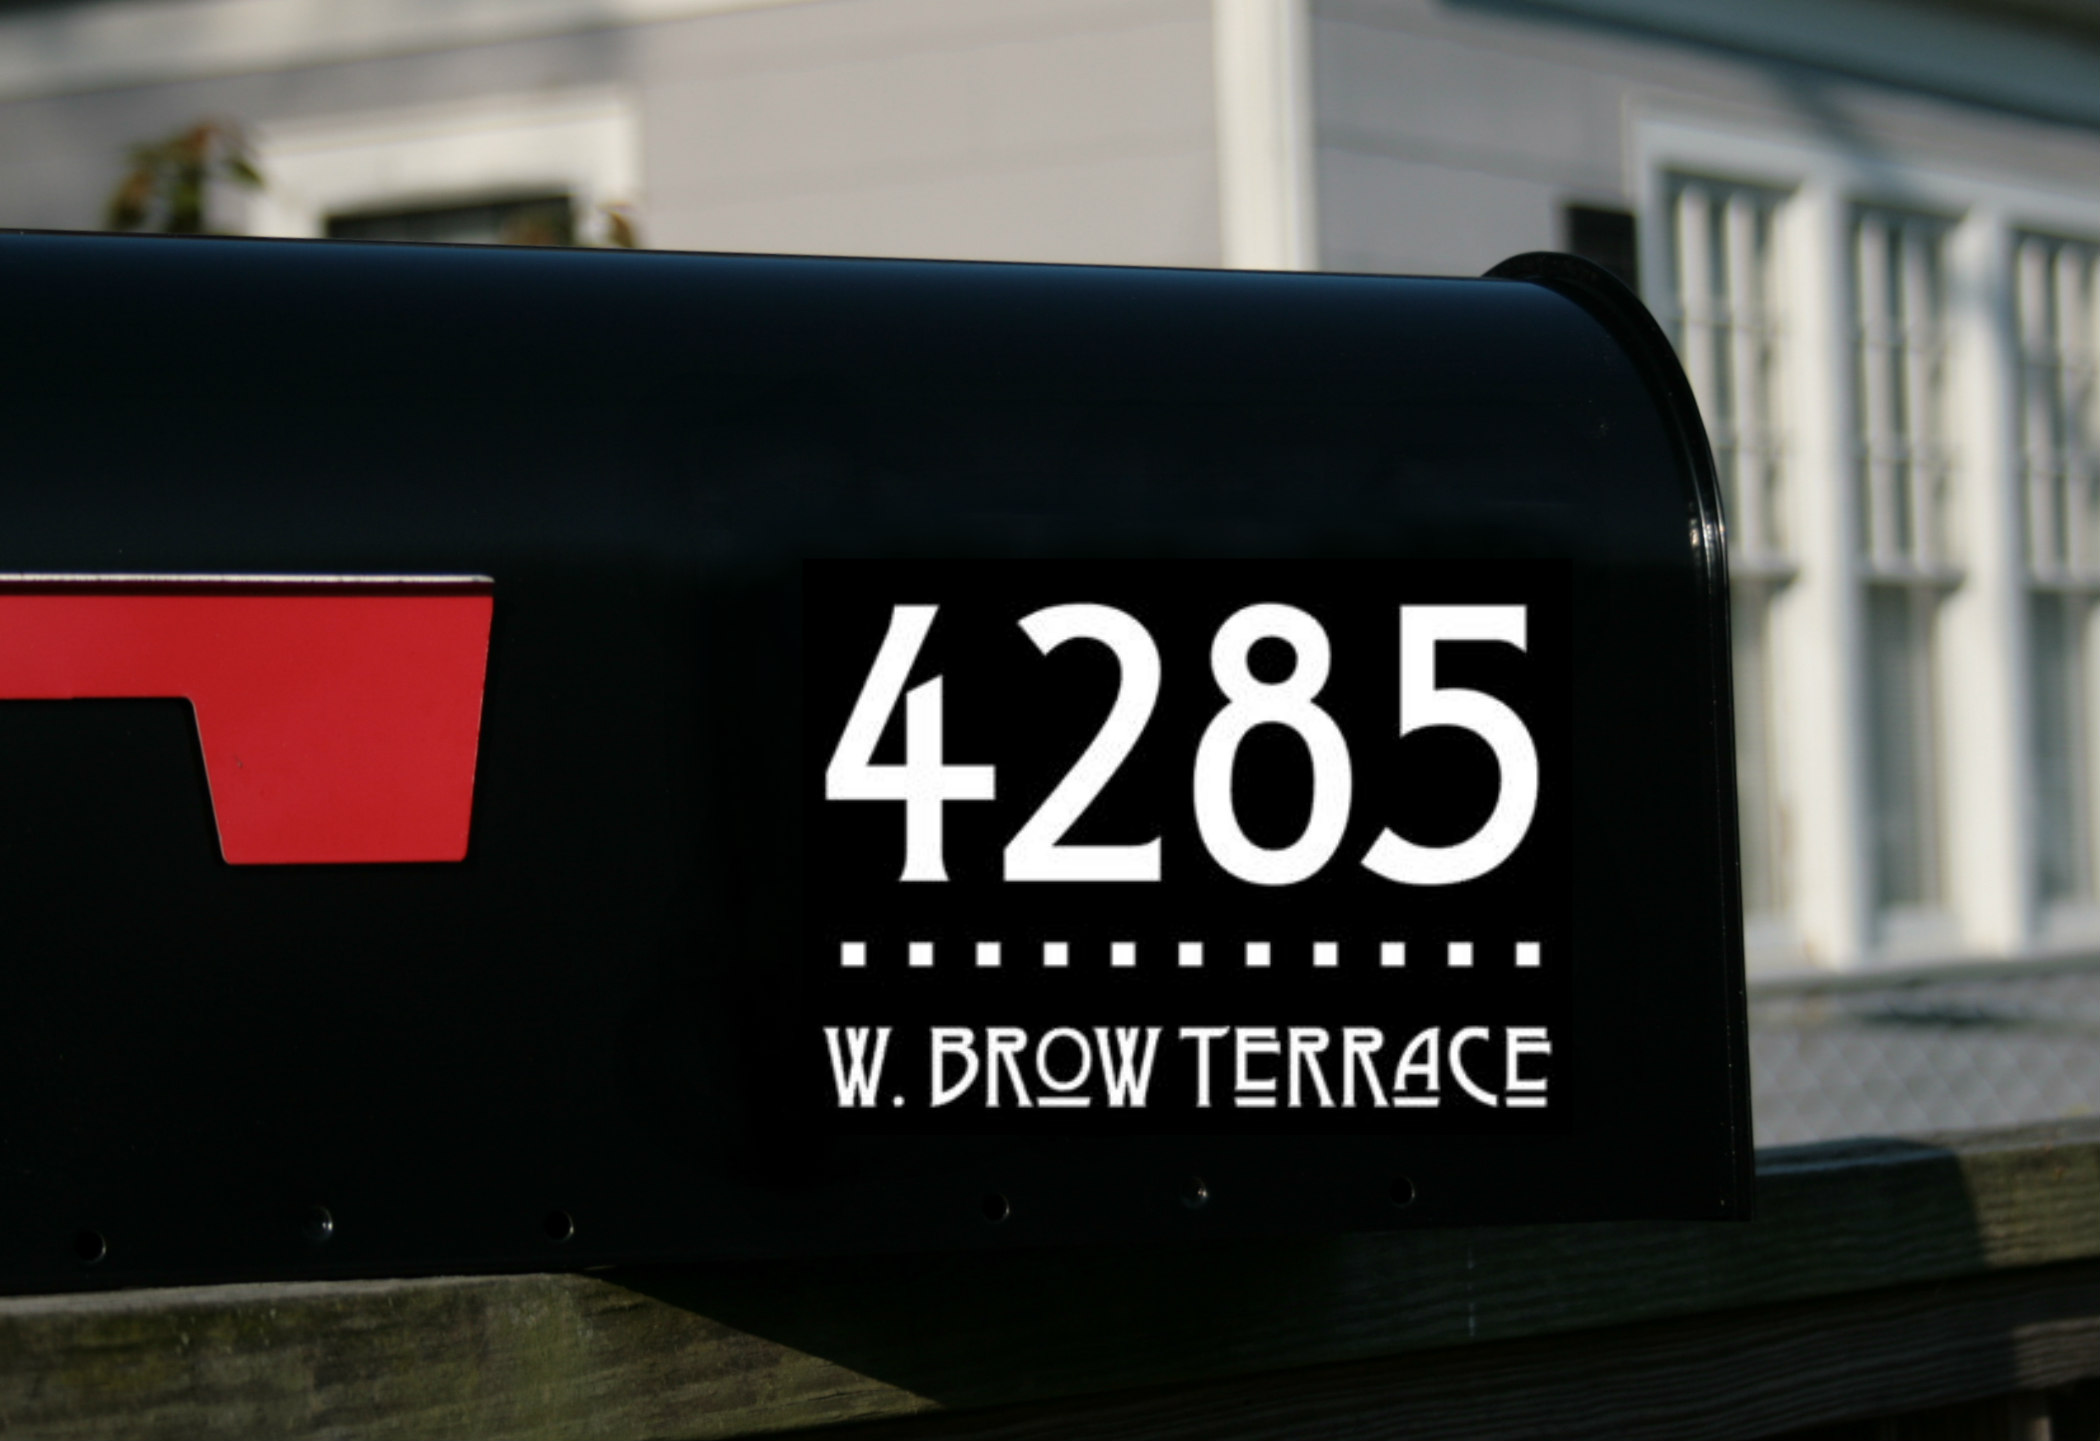 Mailbox Address Number Initial Decal One for each side Customized Set of 2 Decals included in set!